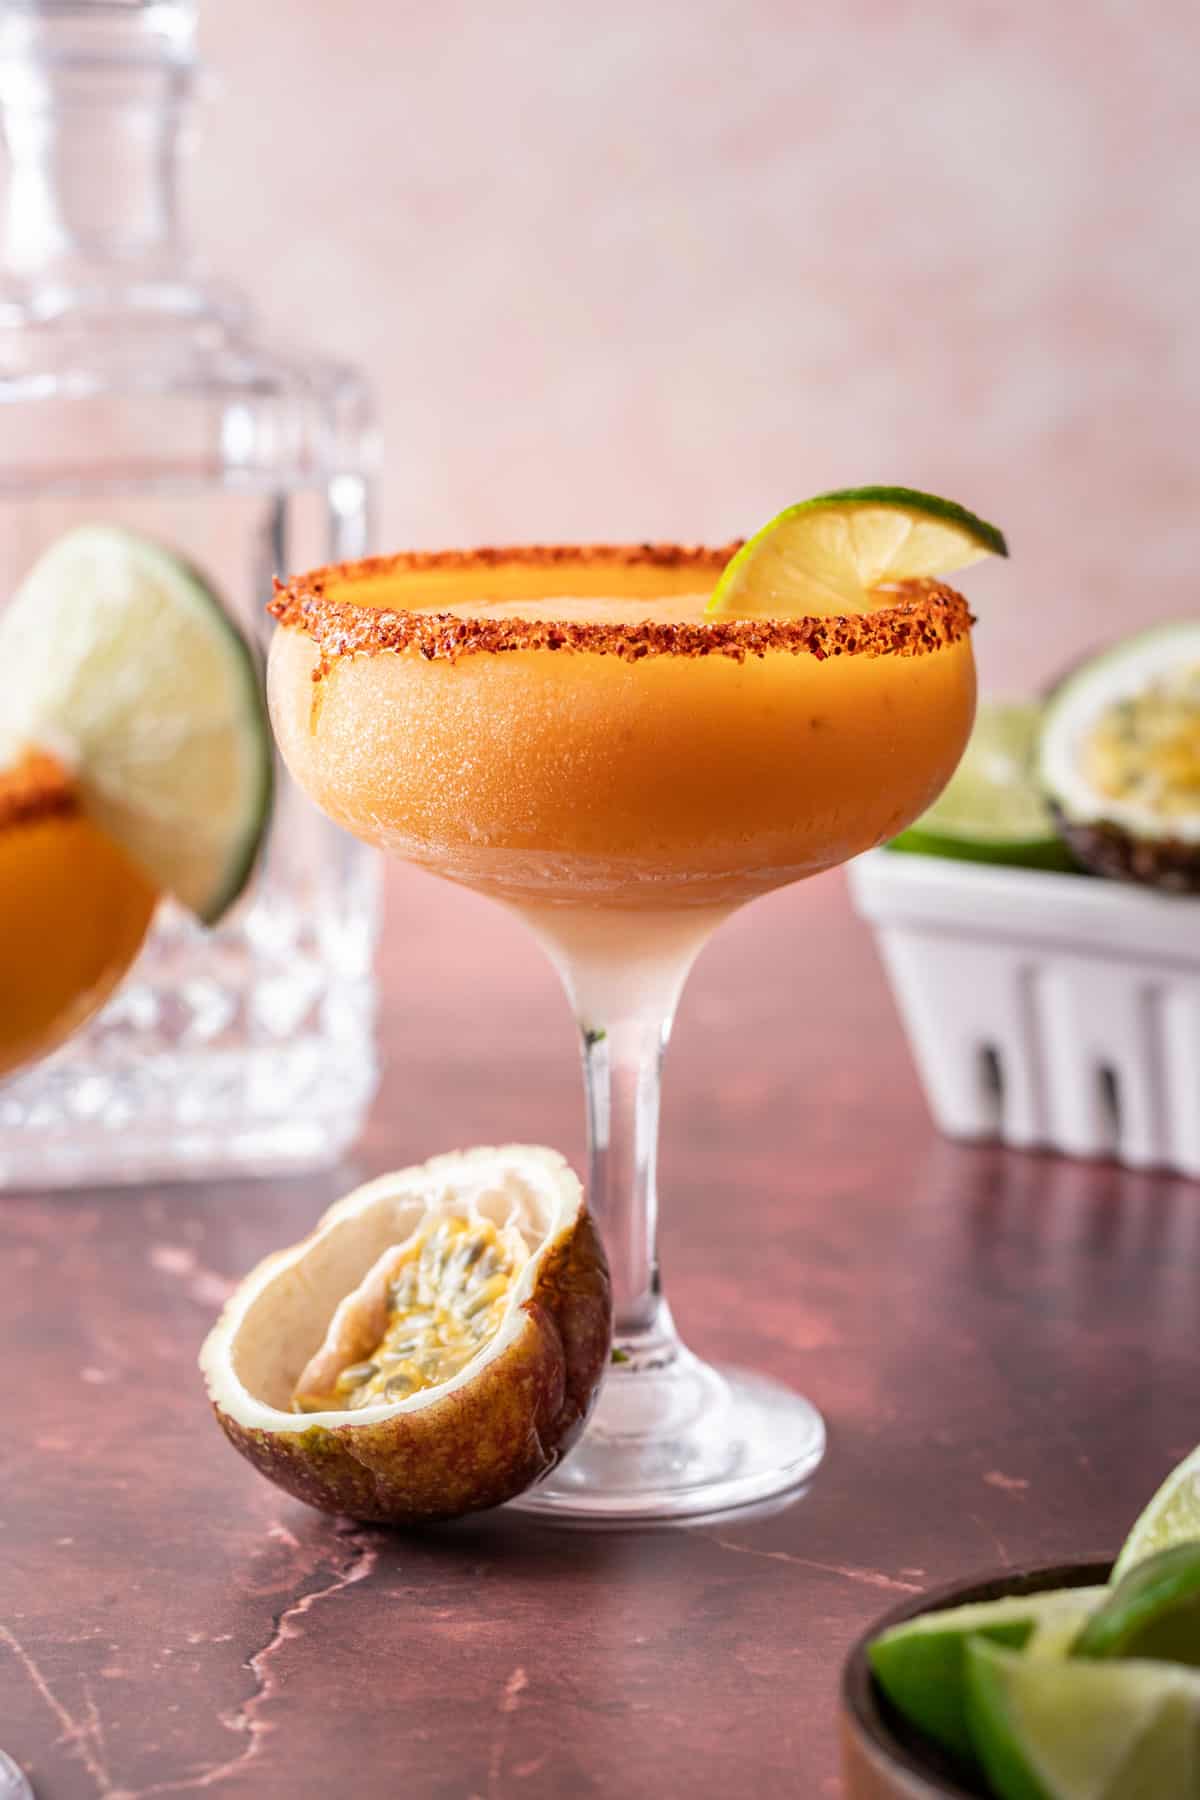 Passion fruit margarita with a tajin rim, garnished with a lime slice and a halved passion fruit on the side.